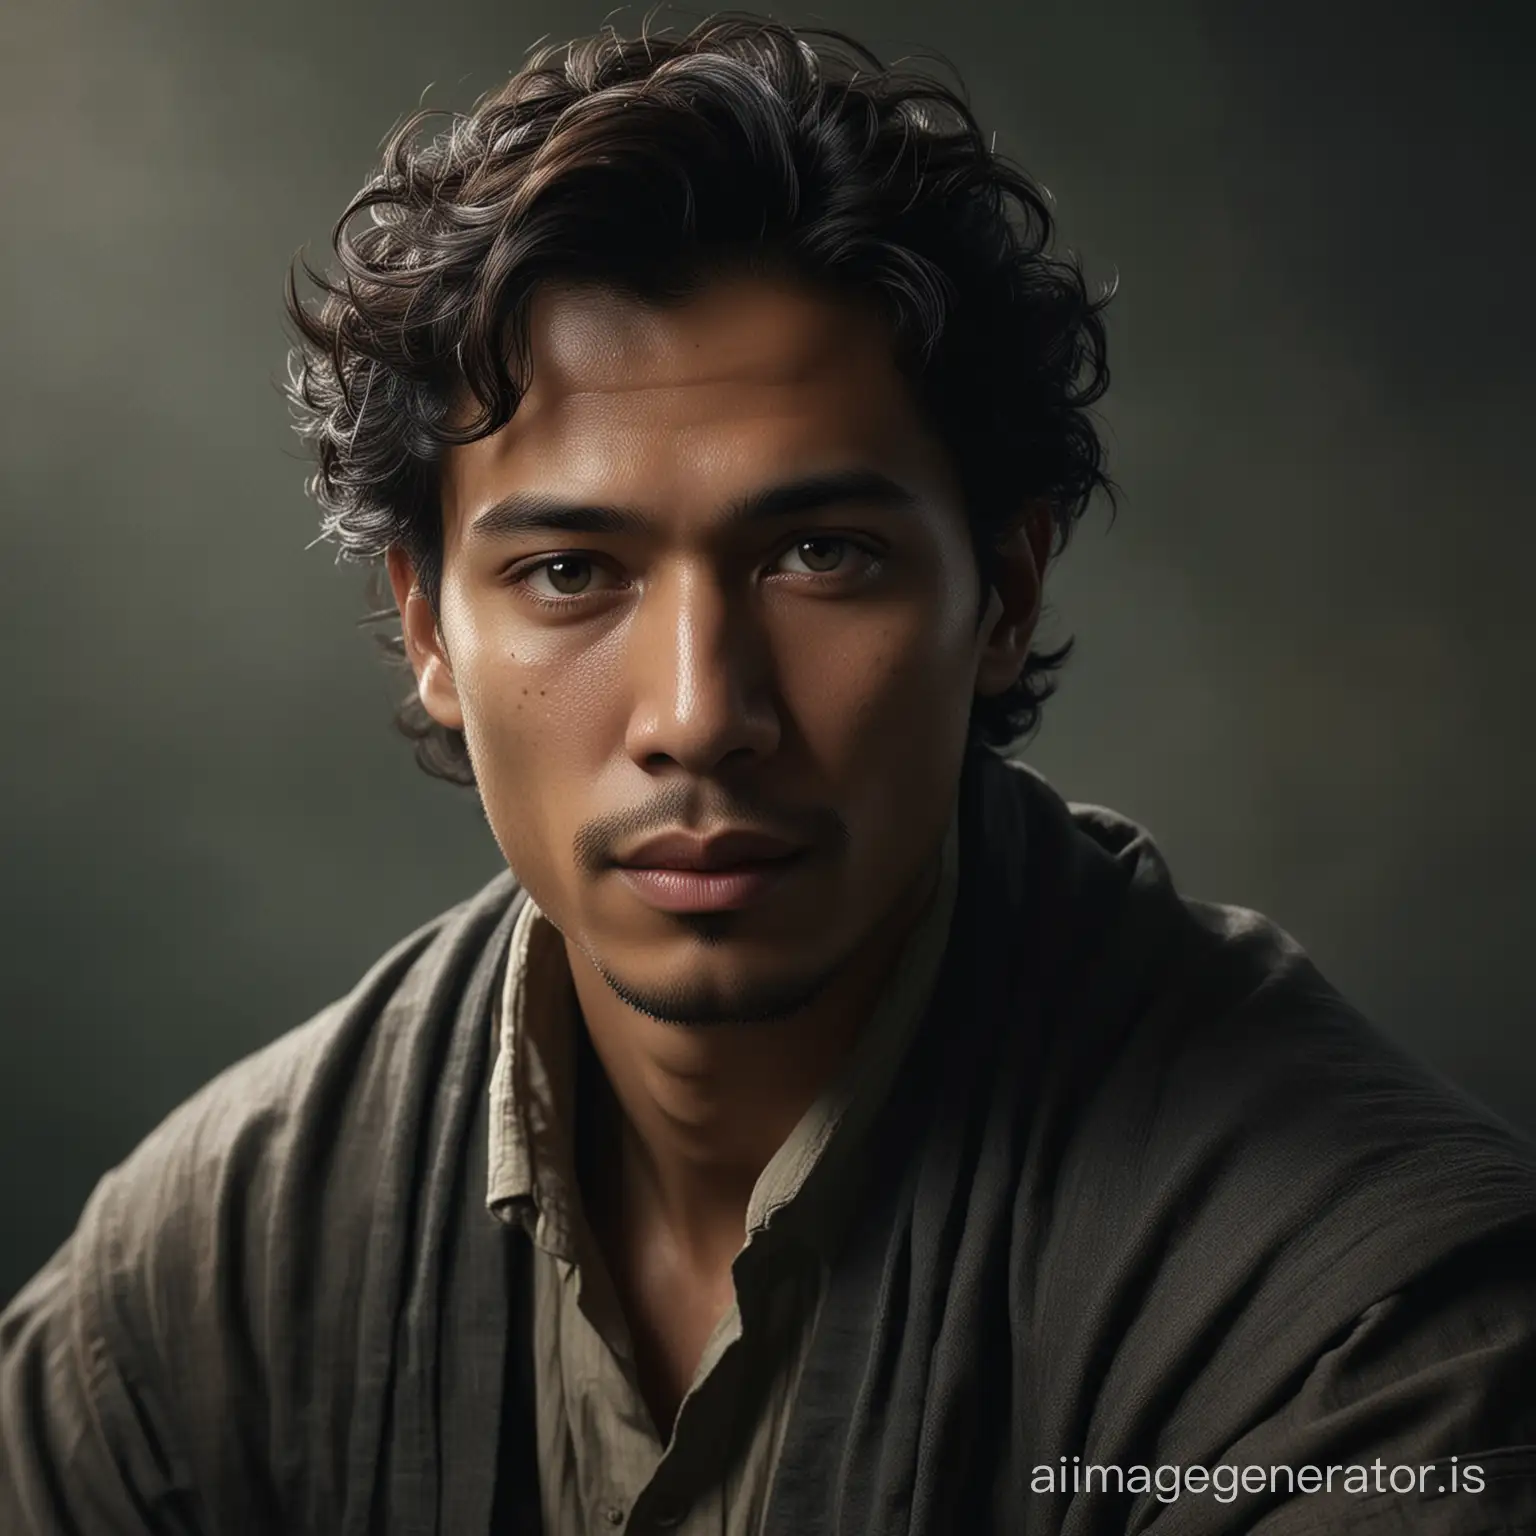 A handsome man from Indonesia, portrayed by Annie Leibovitz. High-quality studio lighting photography extremely detailed 8k digital art photorealistic trend on Flickr in the style of Rembrandt and Caravaggio - n 4 s 3 5 0 7 9 1 2 6 DSLR HQ intricate detailed ultra-realistic machine non-existent octane render cinematic light dramatic shadows natural sunlight foggy weather misty atmosphere realism